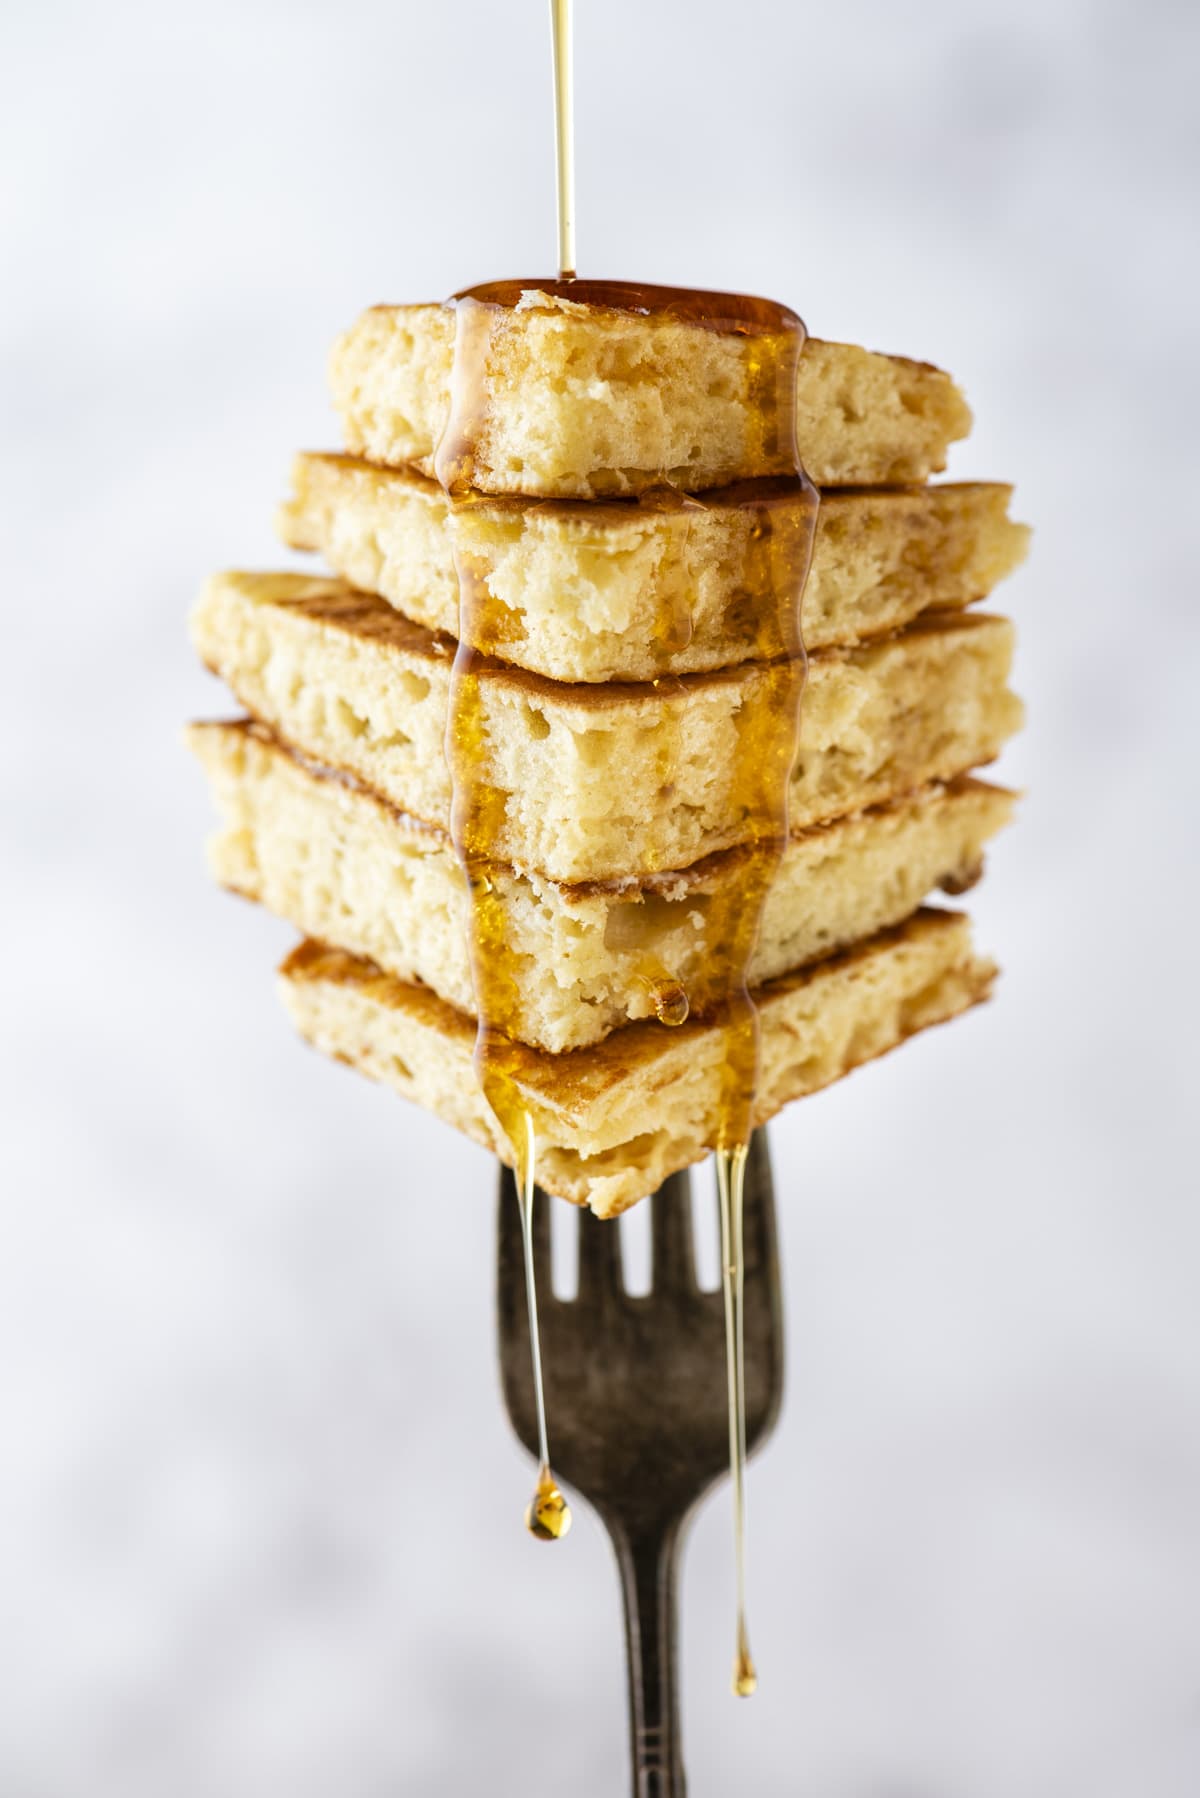 a stack of pancake slices piled up and being held vertically on a fork, with syrup being drizzled and dripping down